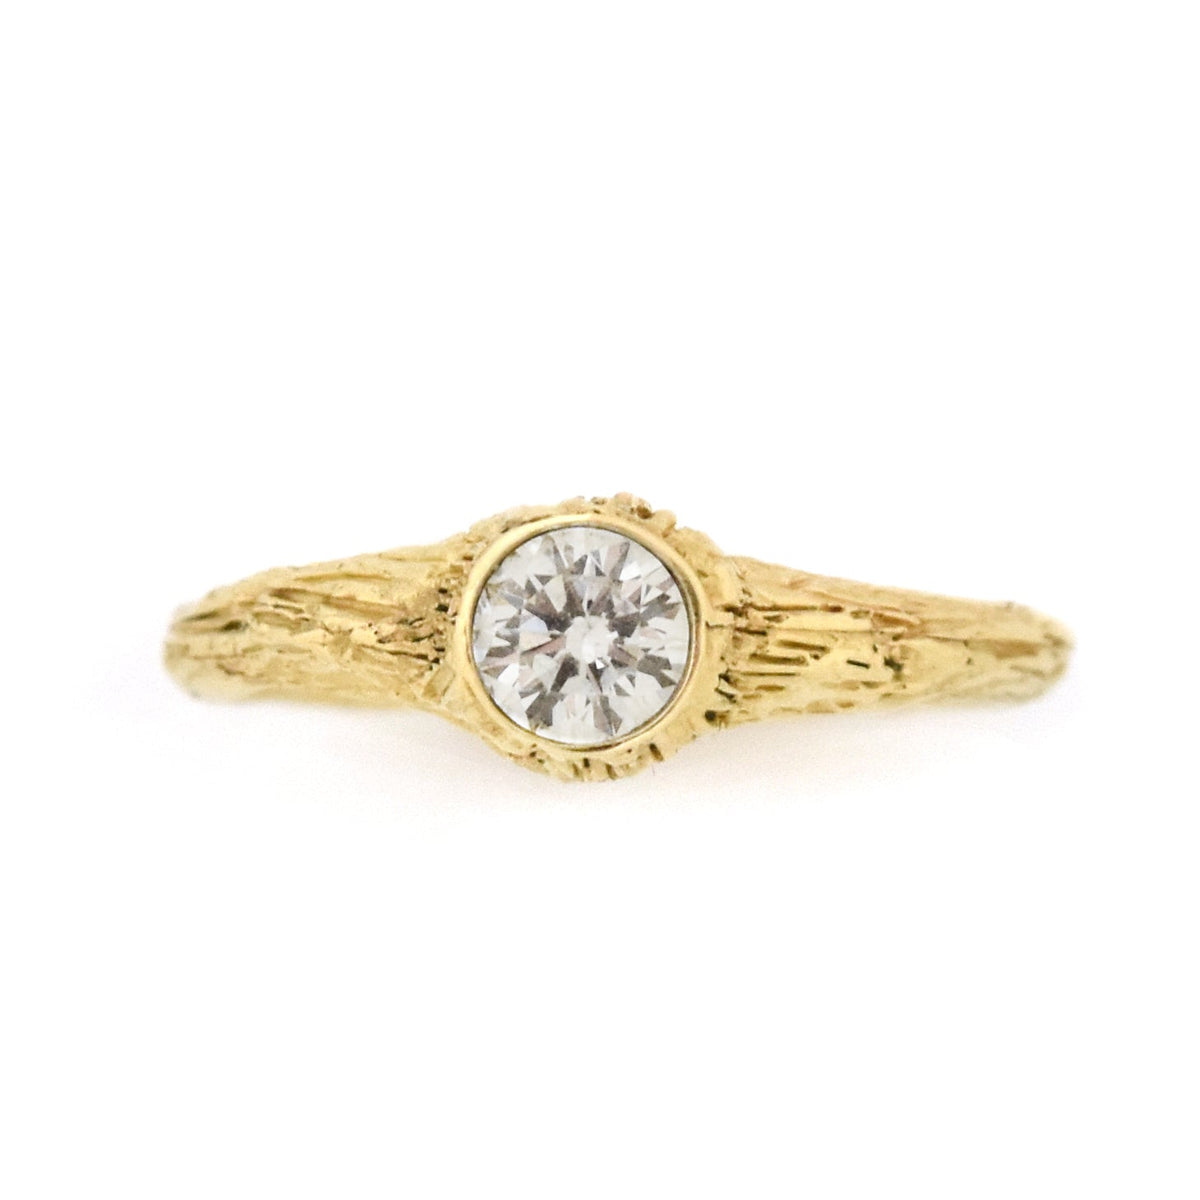 Gold Heartwood Diamond Ring - your choice of 5mm stone & gold - Wedding Ring Recycled Diamond / 14K Yellow Gold Conflict Free Diamond / 14K Yellow Gold 6325 - handmade by Beth Millner Jewelry